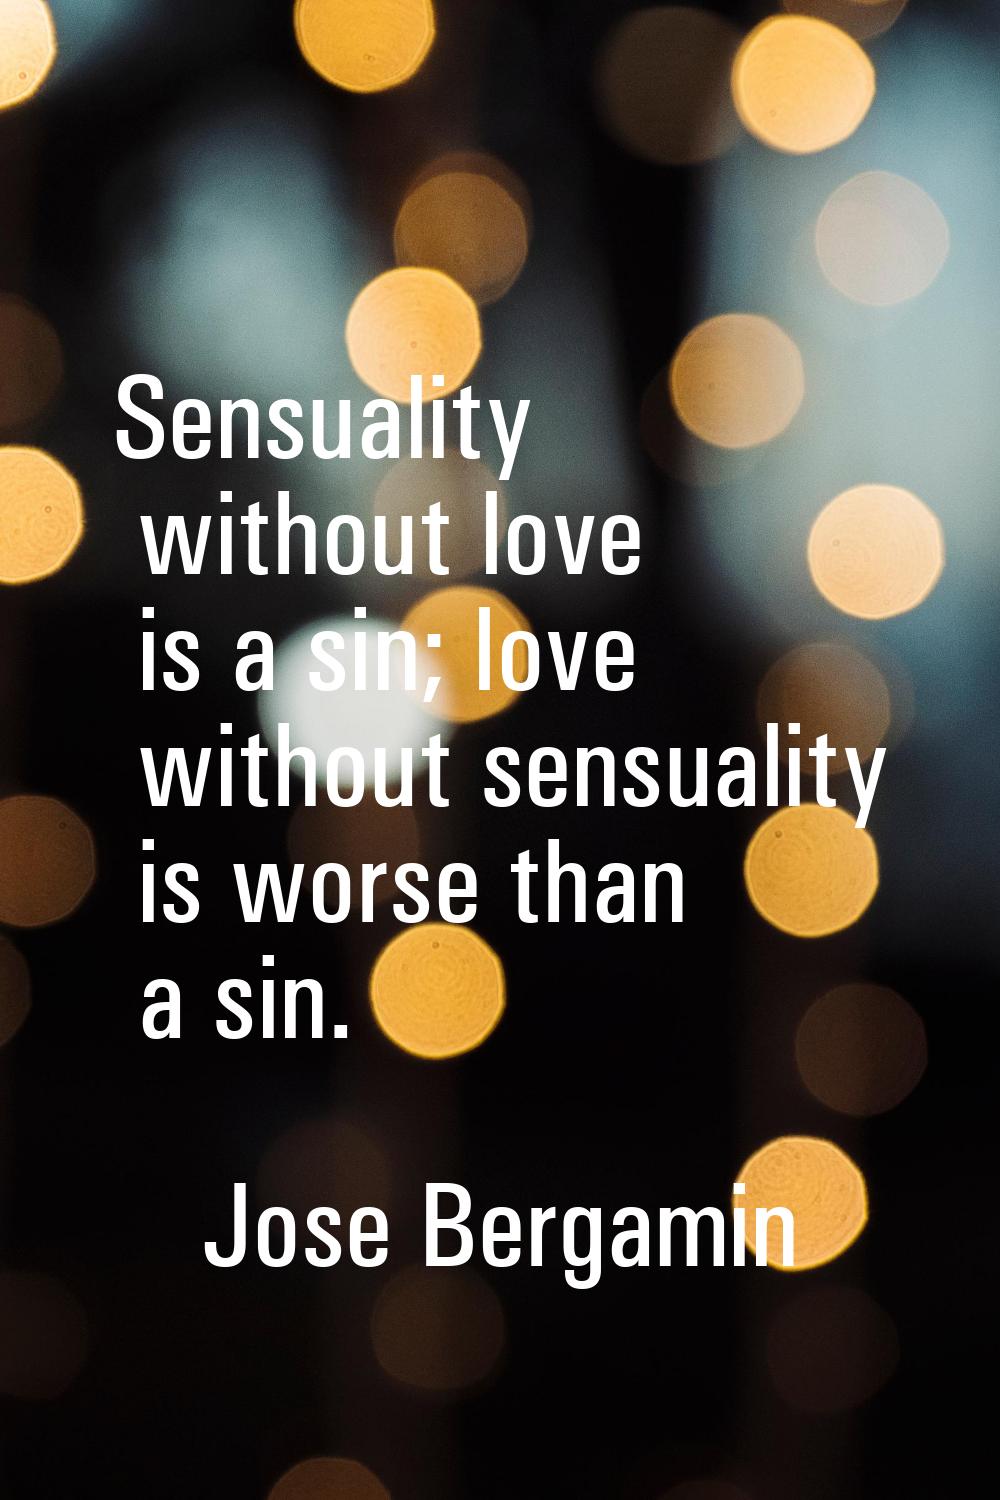 Sensuality without love is a sin; love without sensuality is worse than a sin.